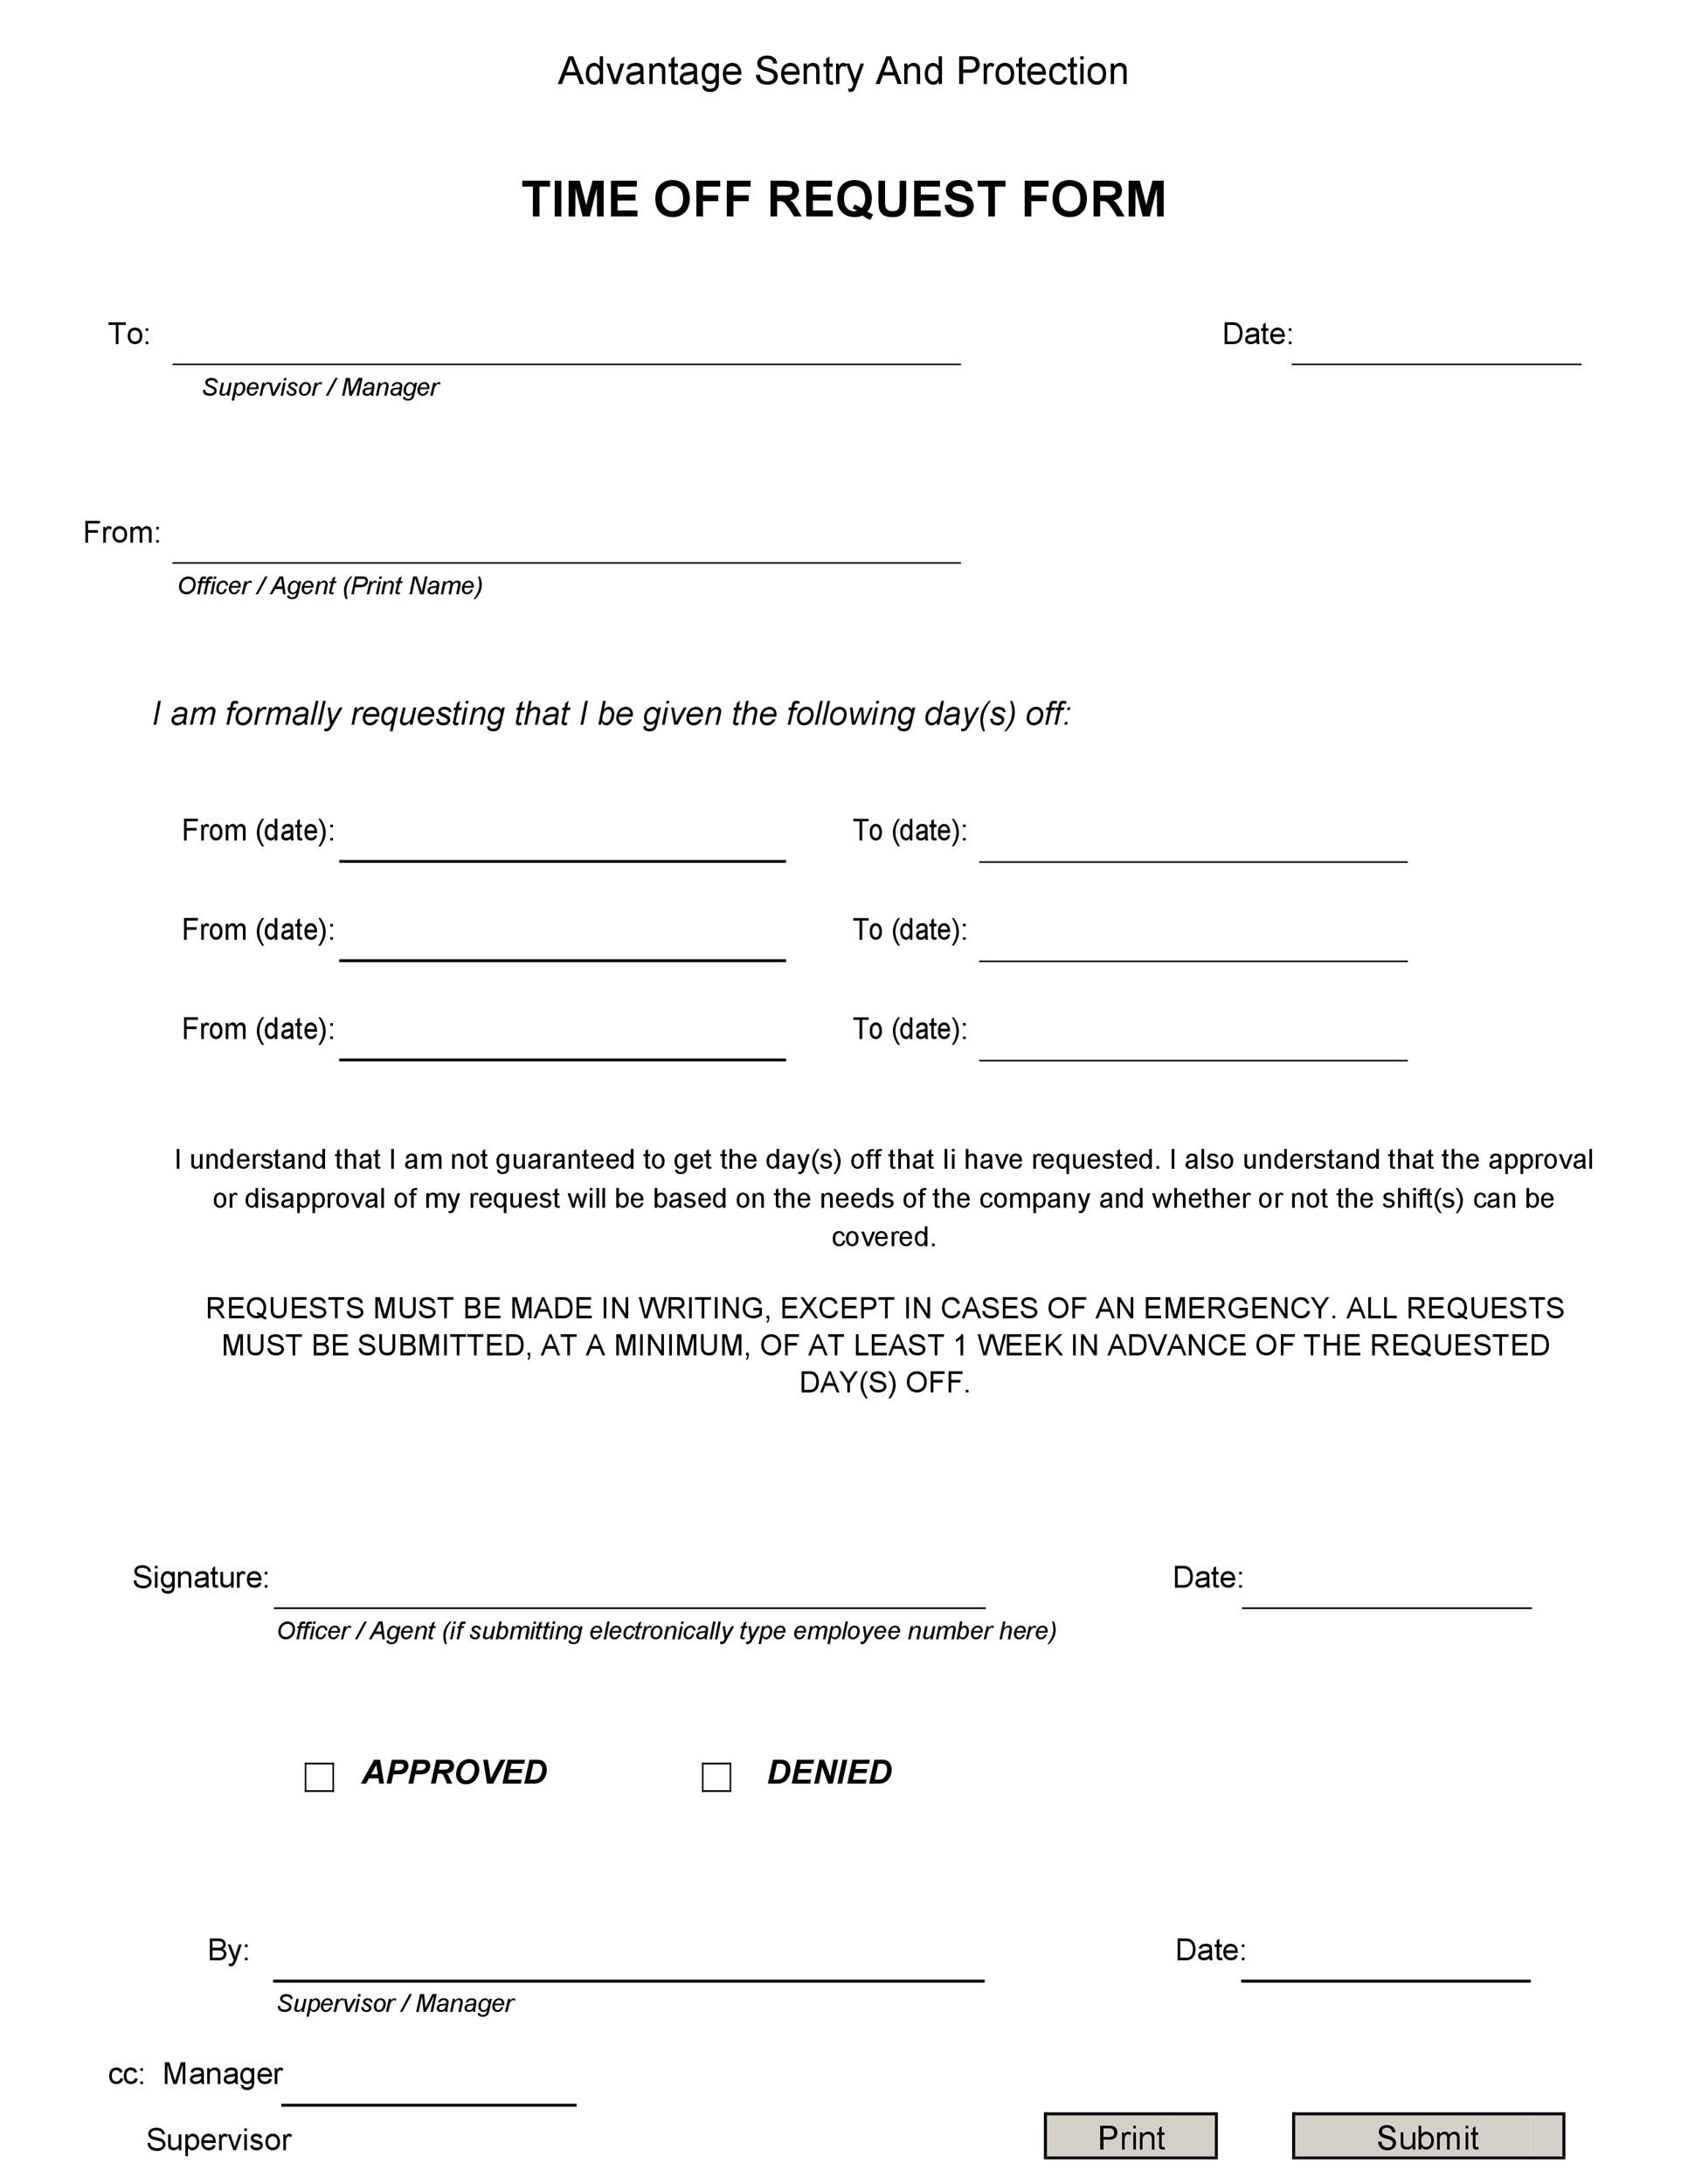 Time Off Request Form Template Printable Printable Forms Free Online 13668 Hot Sex Picture